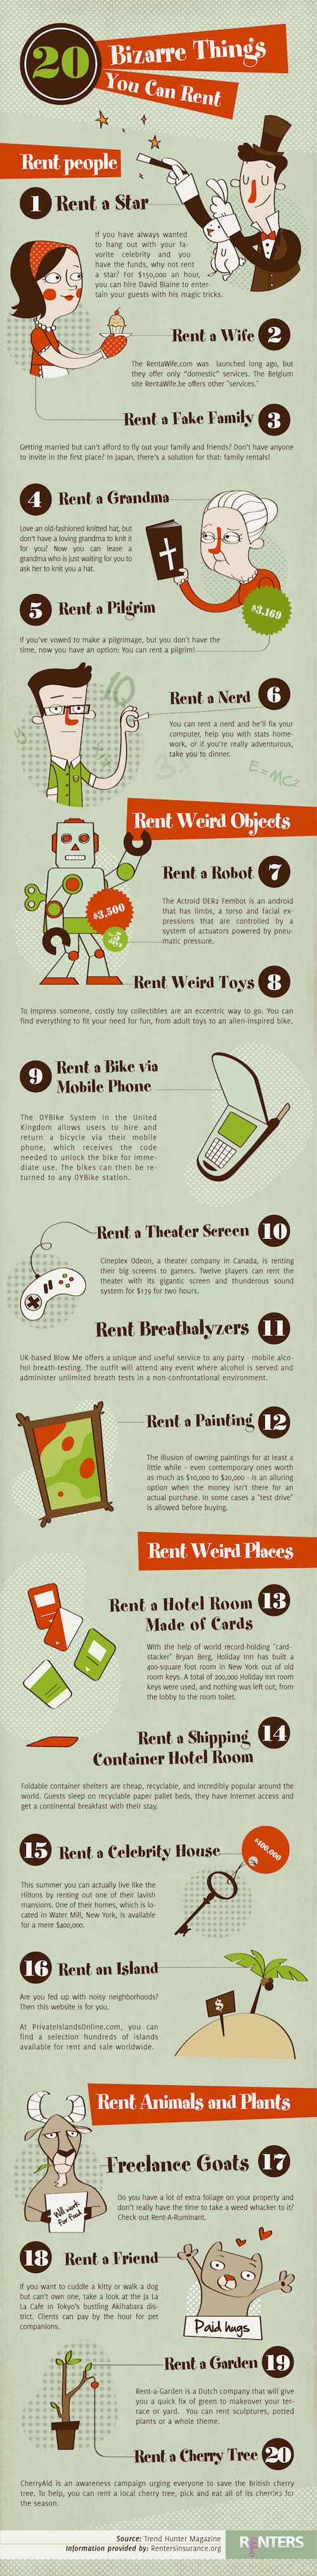 20 things to rent that are surprising infographic